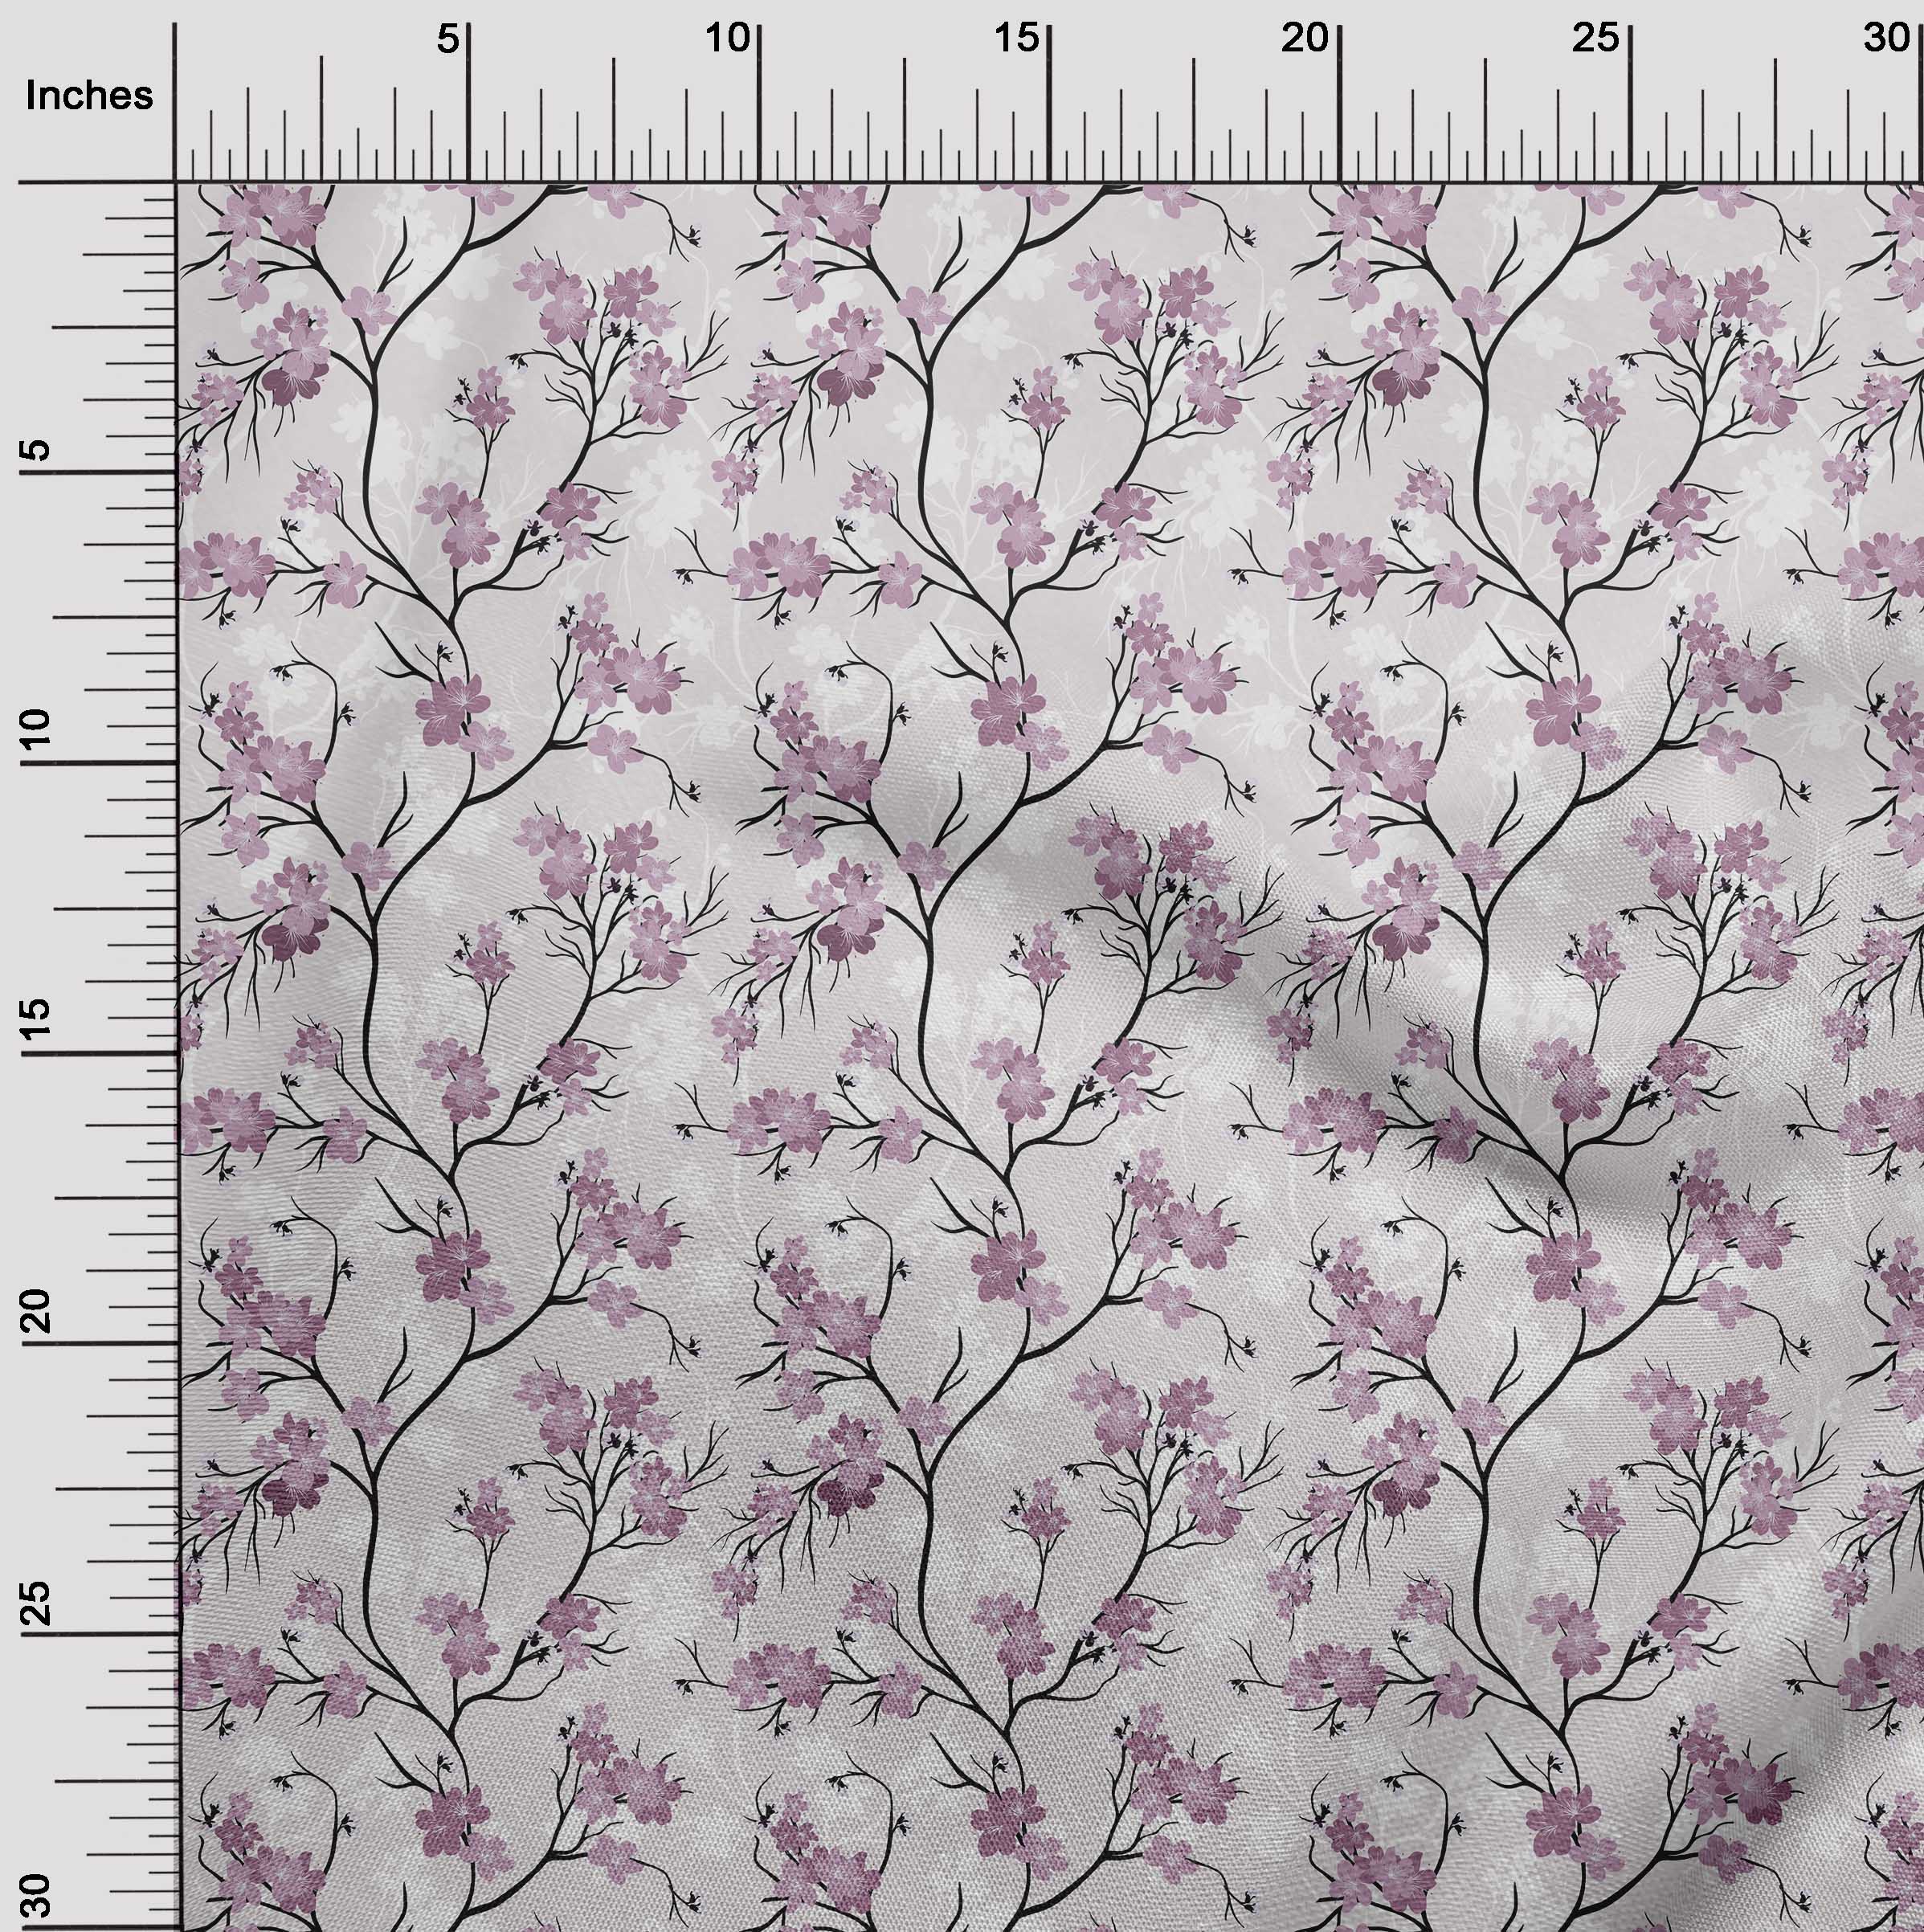 oneOone Cotton Cambric Lavender Fabric Floral Fabric For Sewing Printed Craft Fabric By The Yard 56 Inch Wide - image 3 of 5